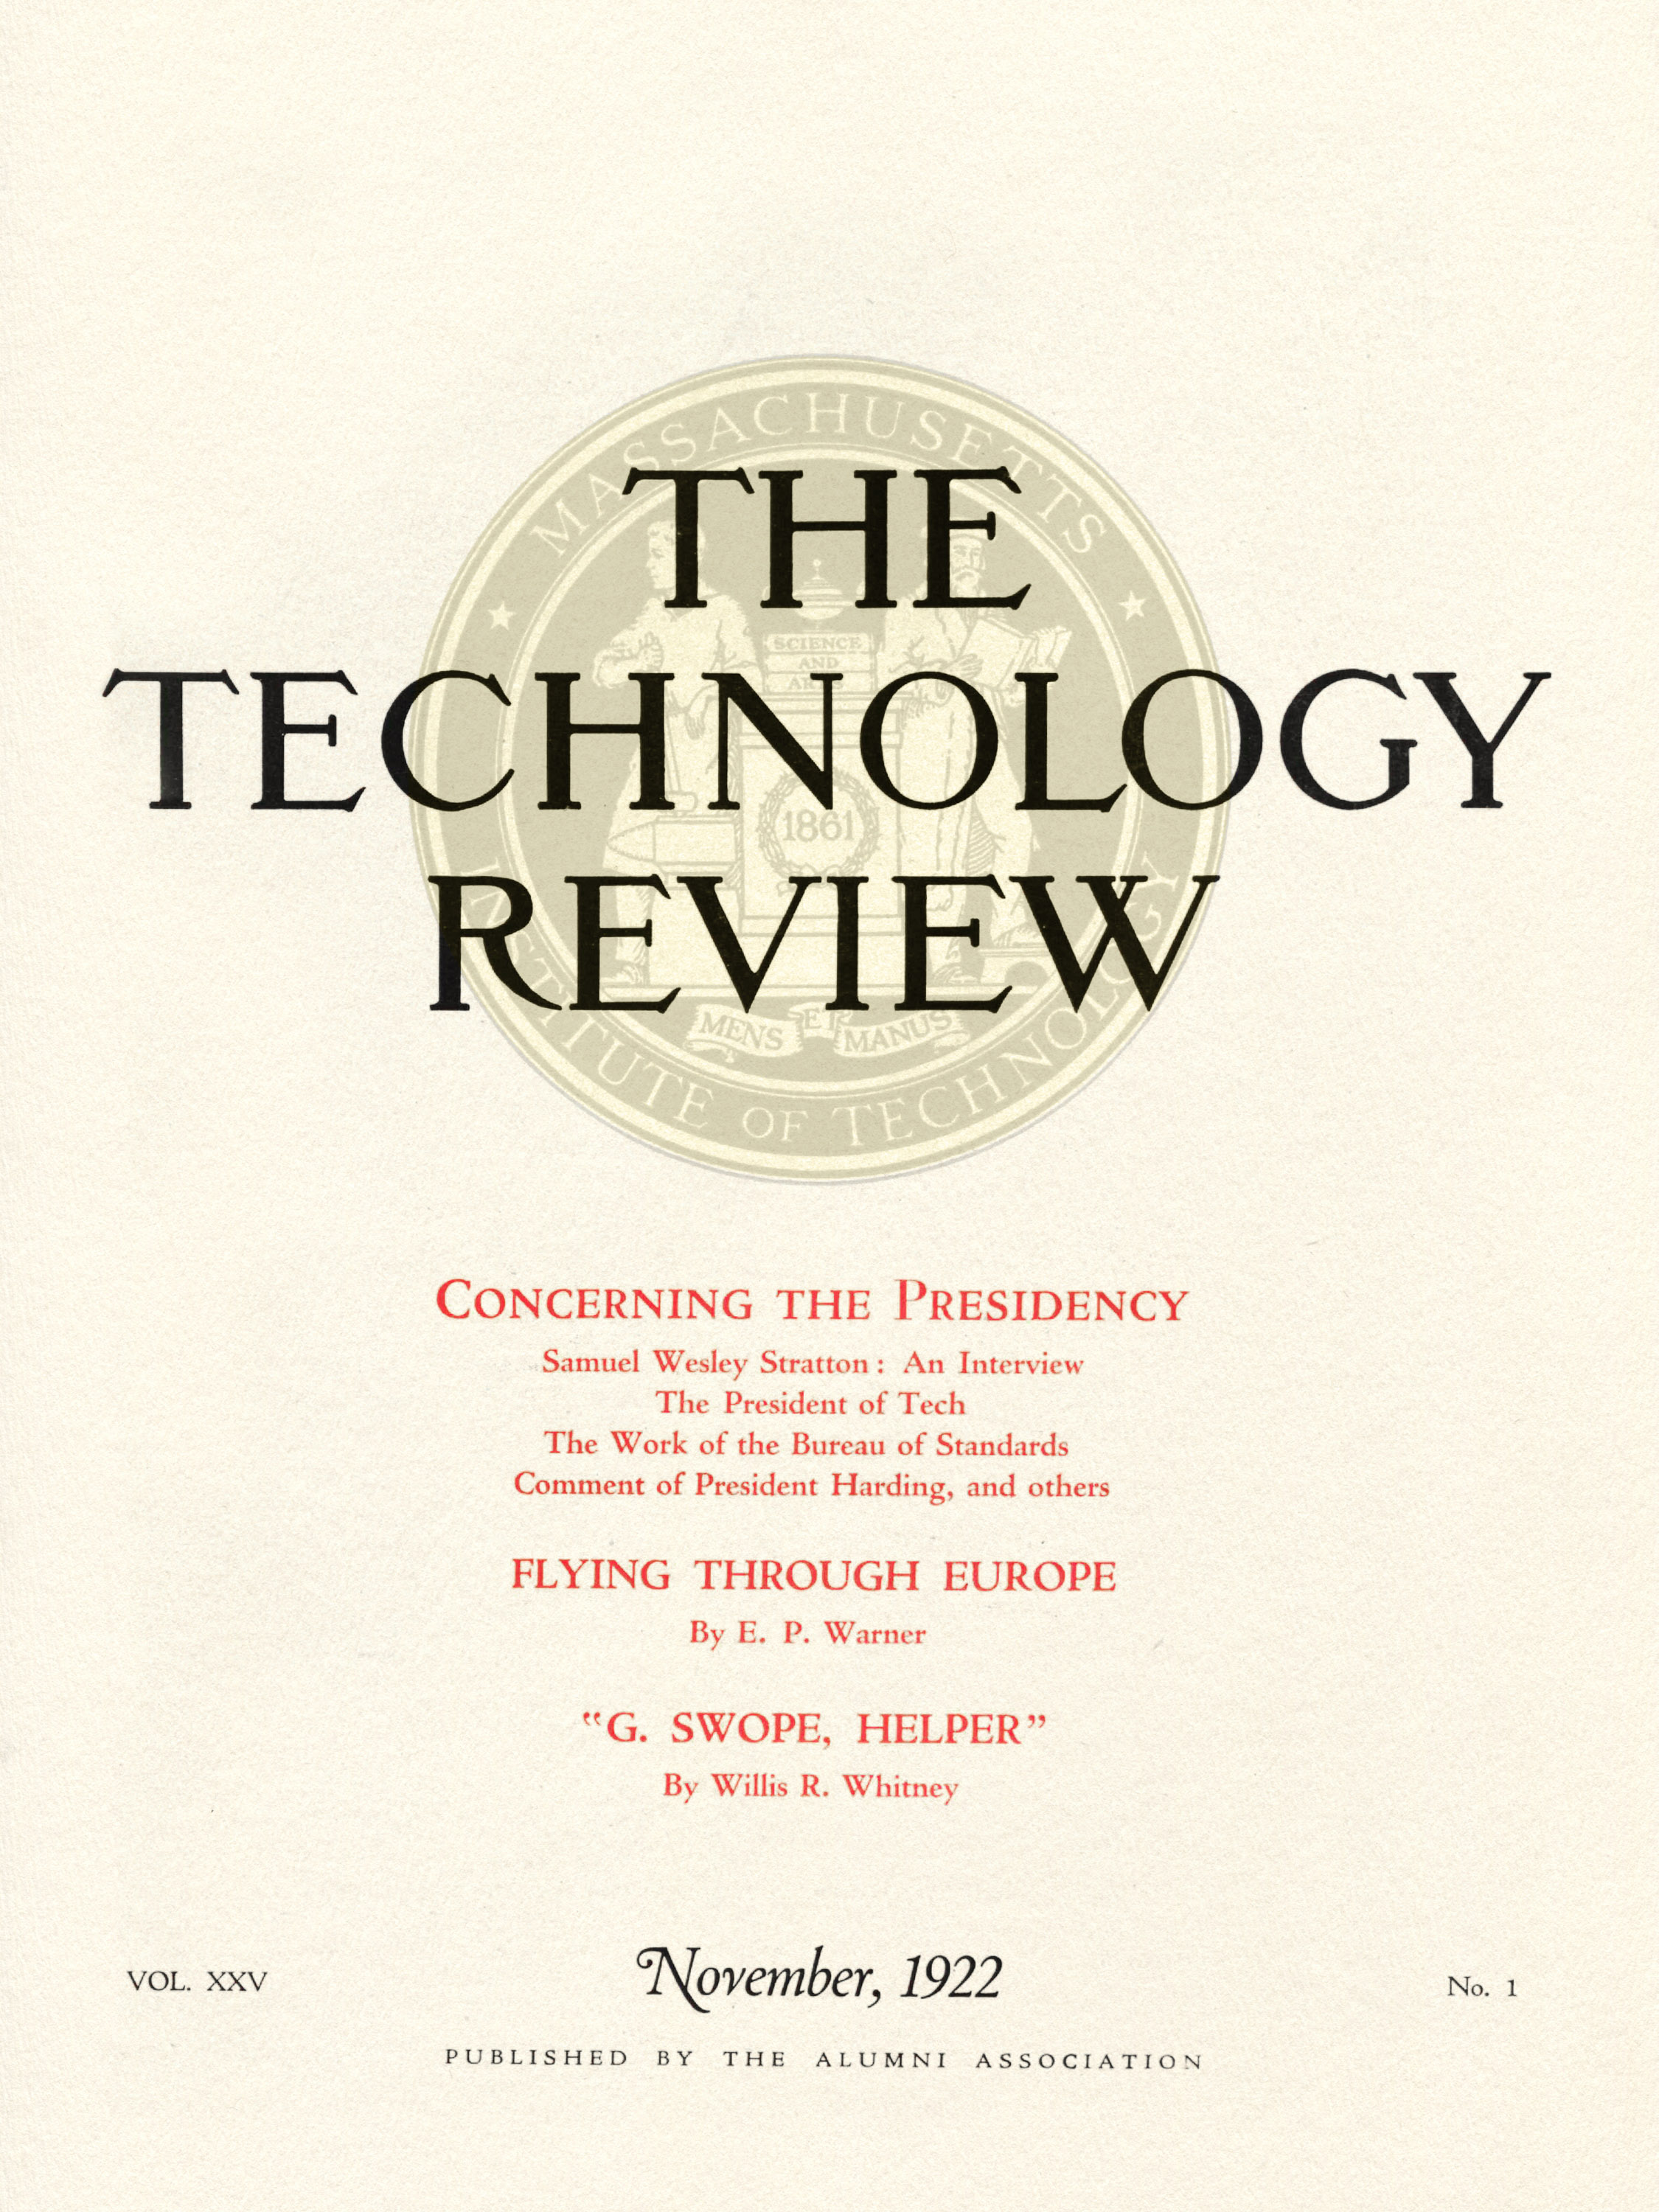 title page of The Technology Review from November 1922